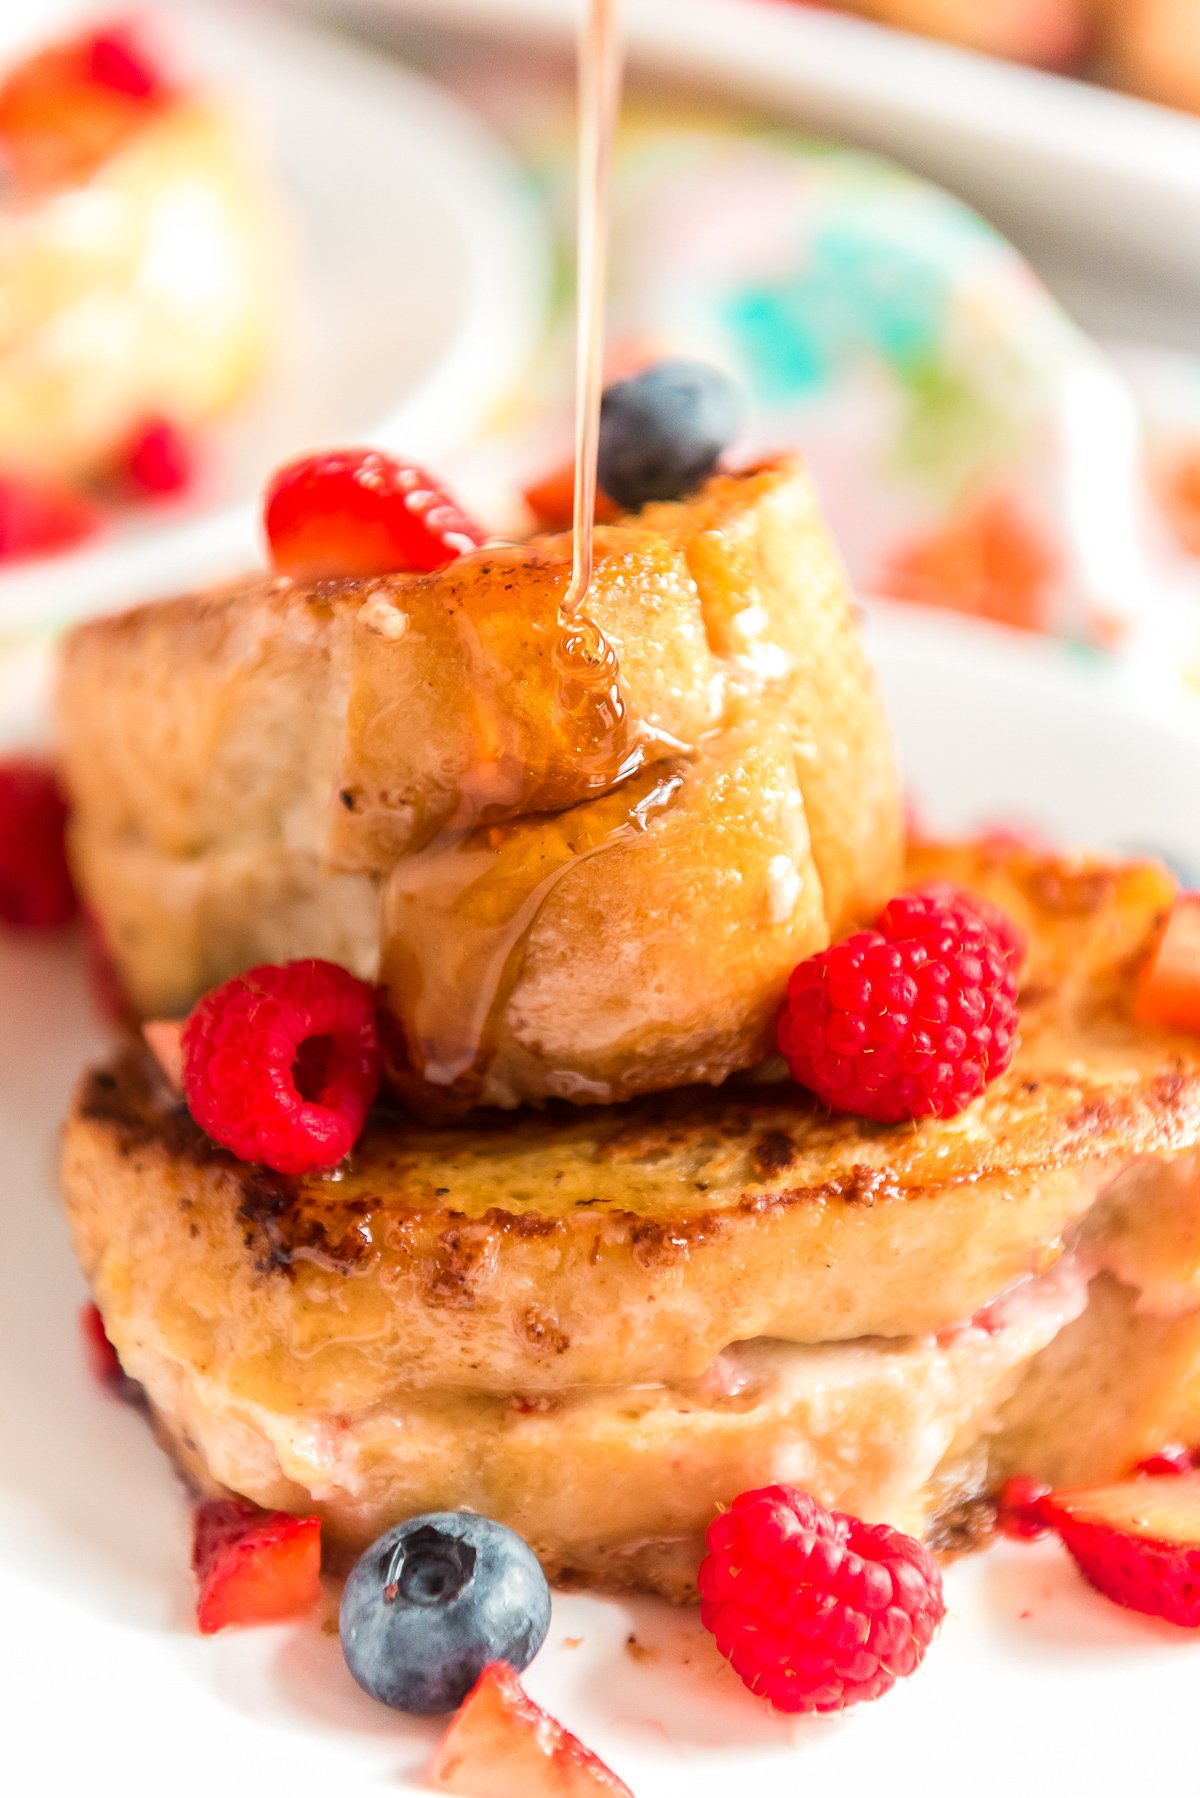 Maple Syrup being poured on a plate of french toast with berries.